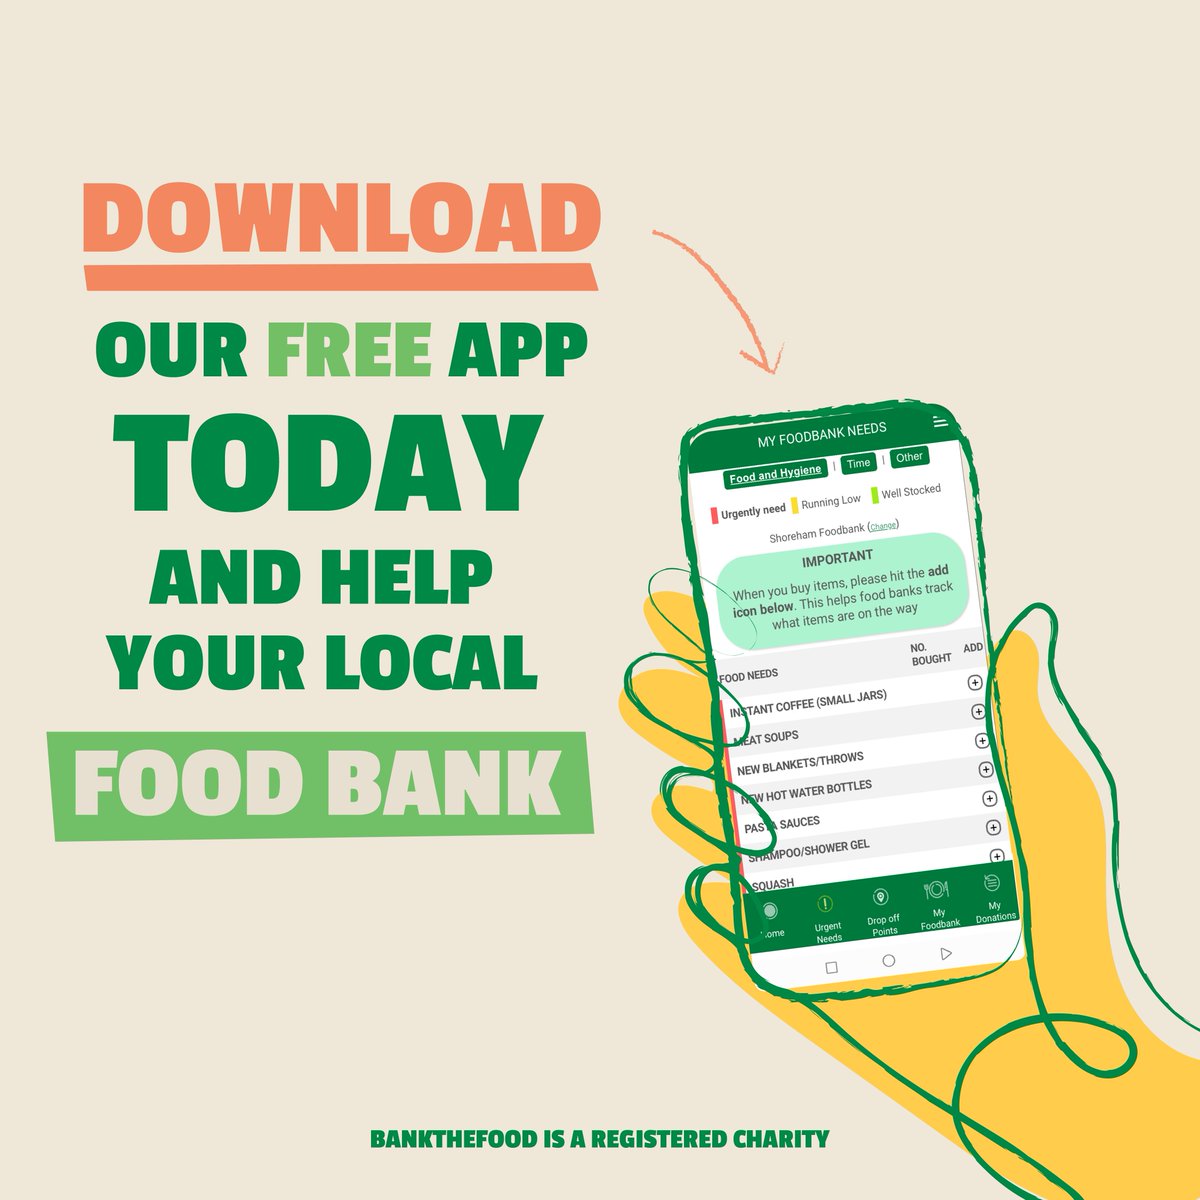 Download the free BanktheFood app today and find out how you can support your local community by meeting its specific food bank needs. Every download makes a difference. Let's do this together. 🌟 #GiveLocal #BanktheFoodApp